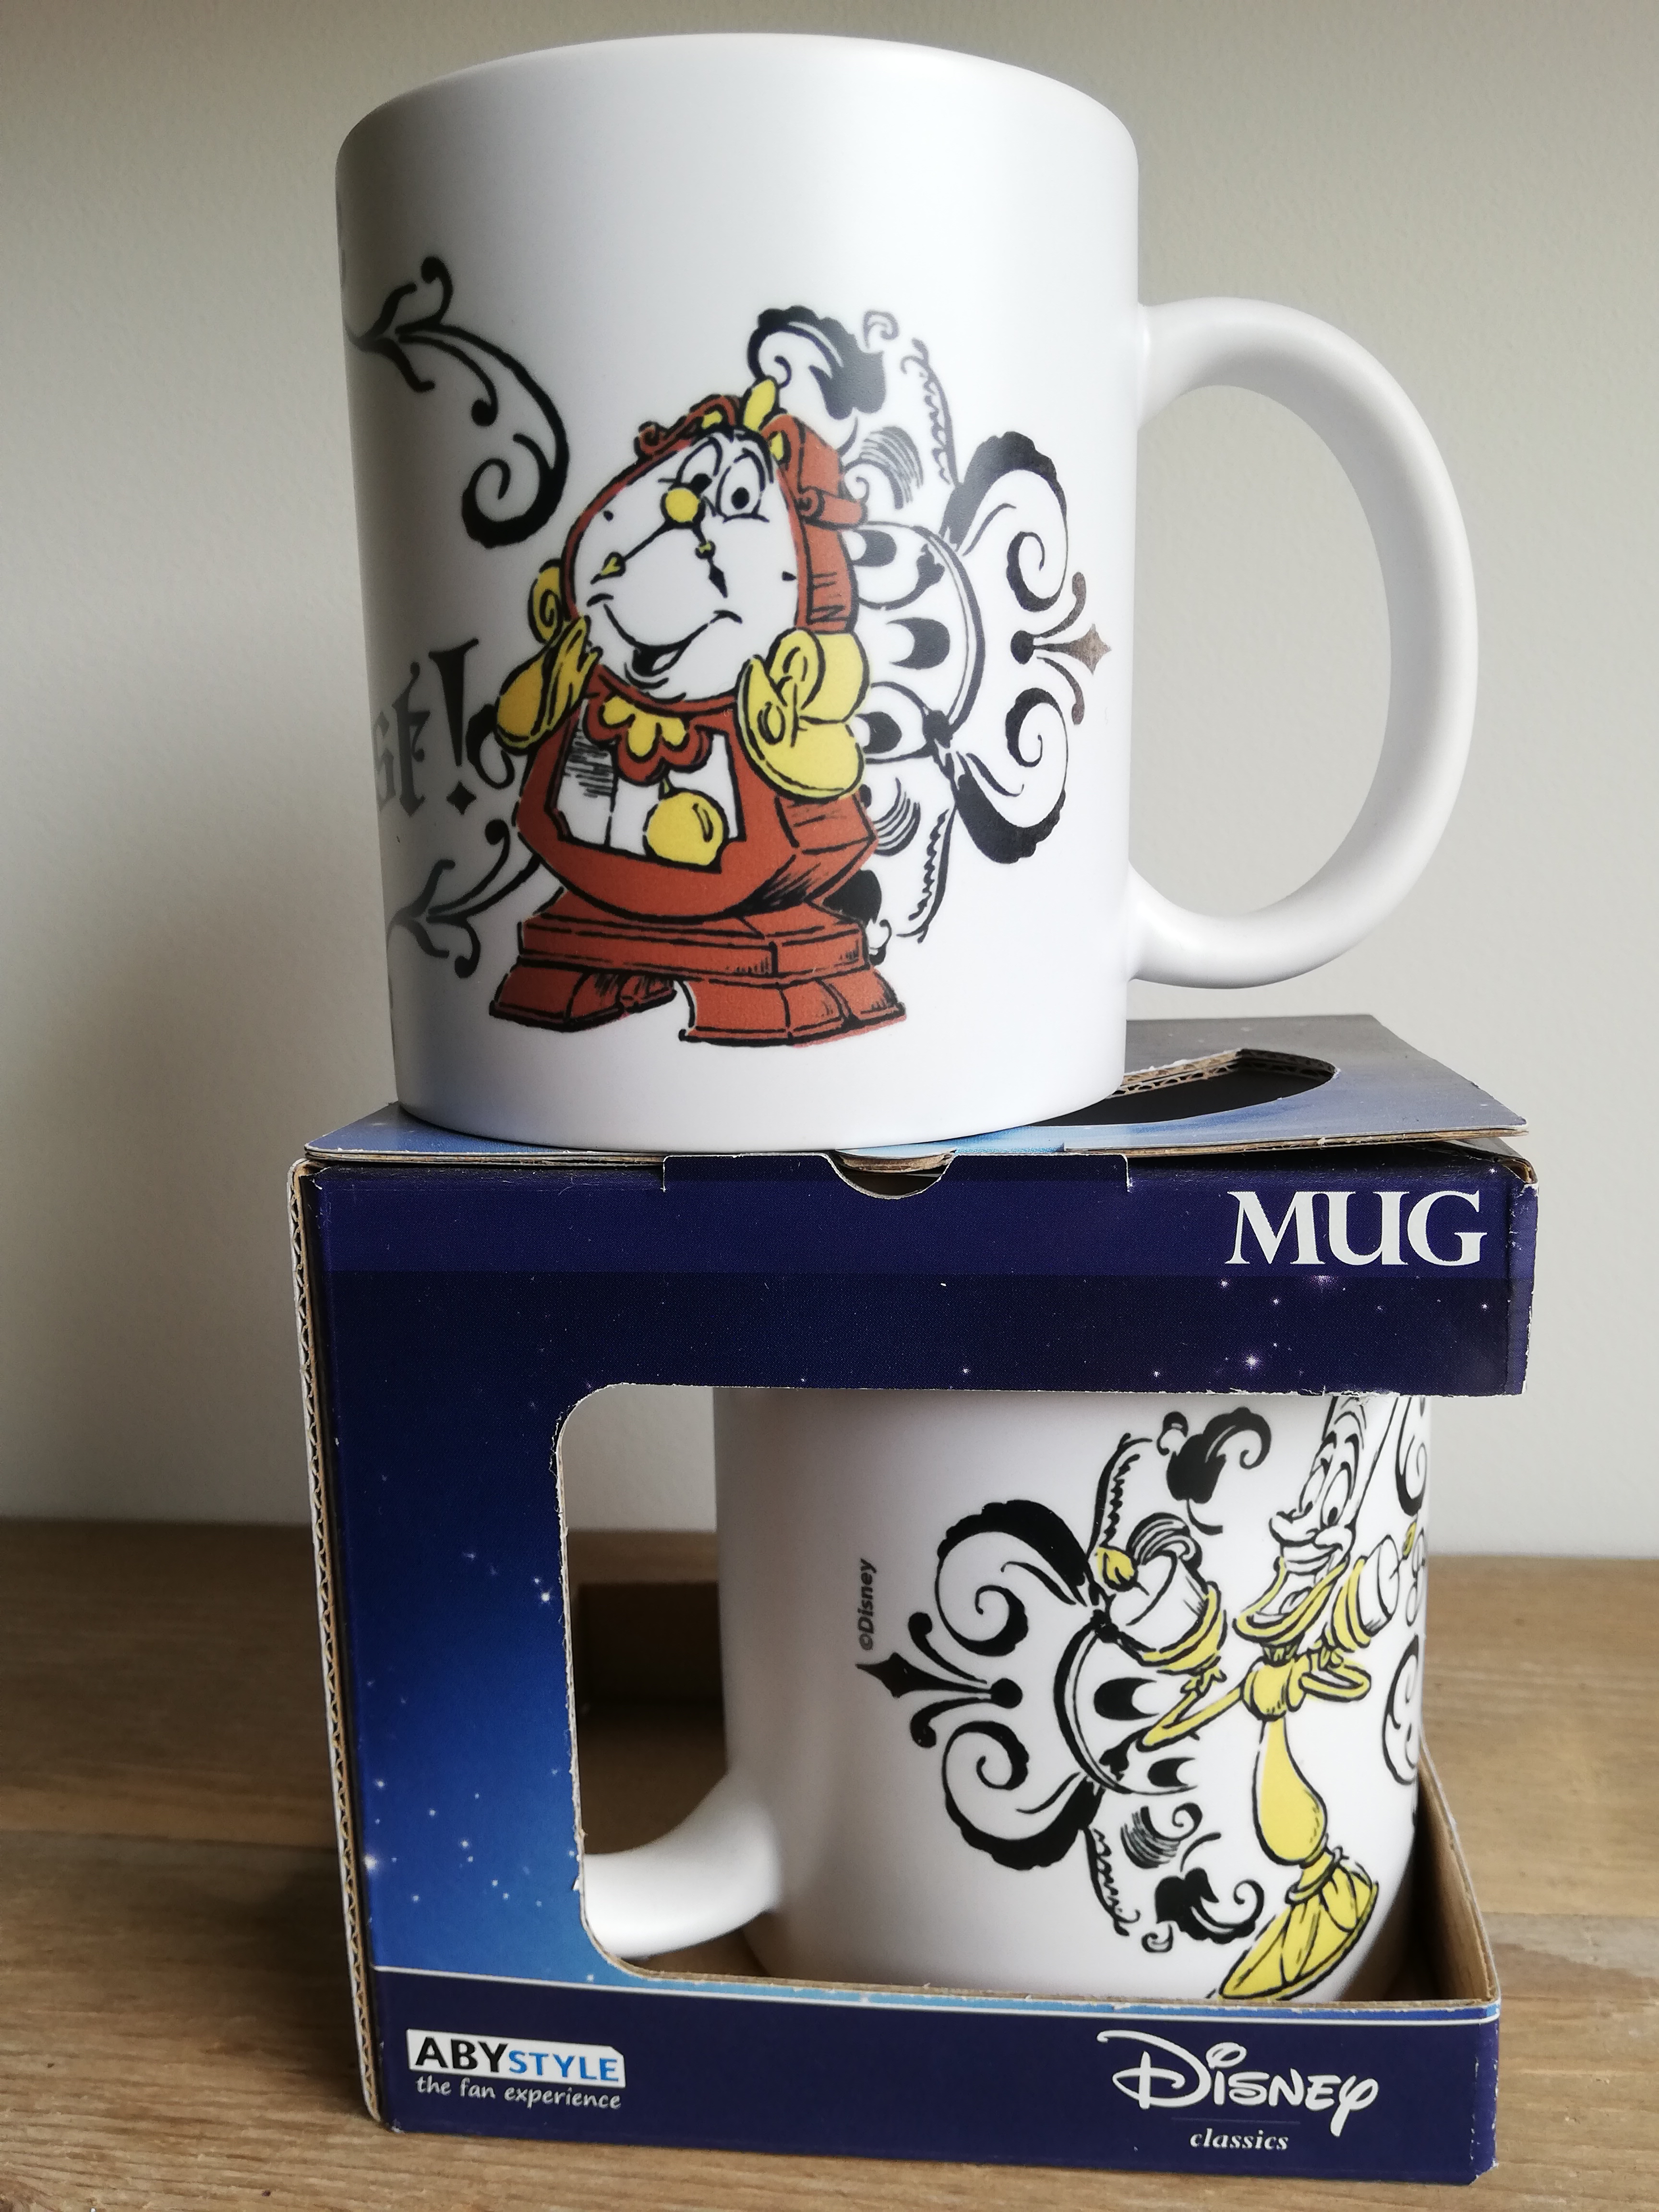 MUG "BE OUR GUEST"